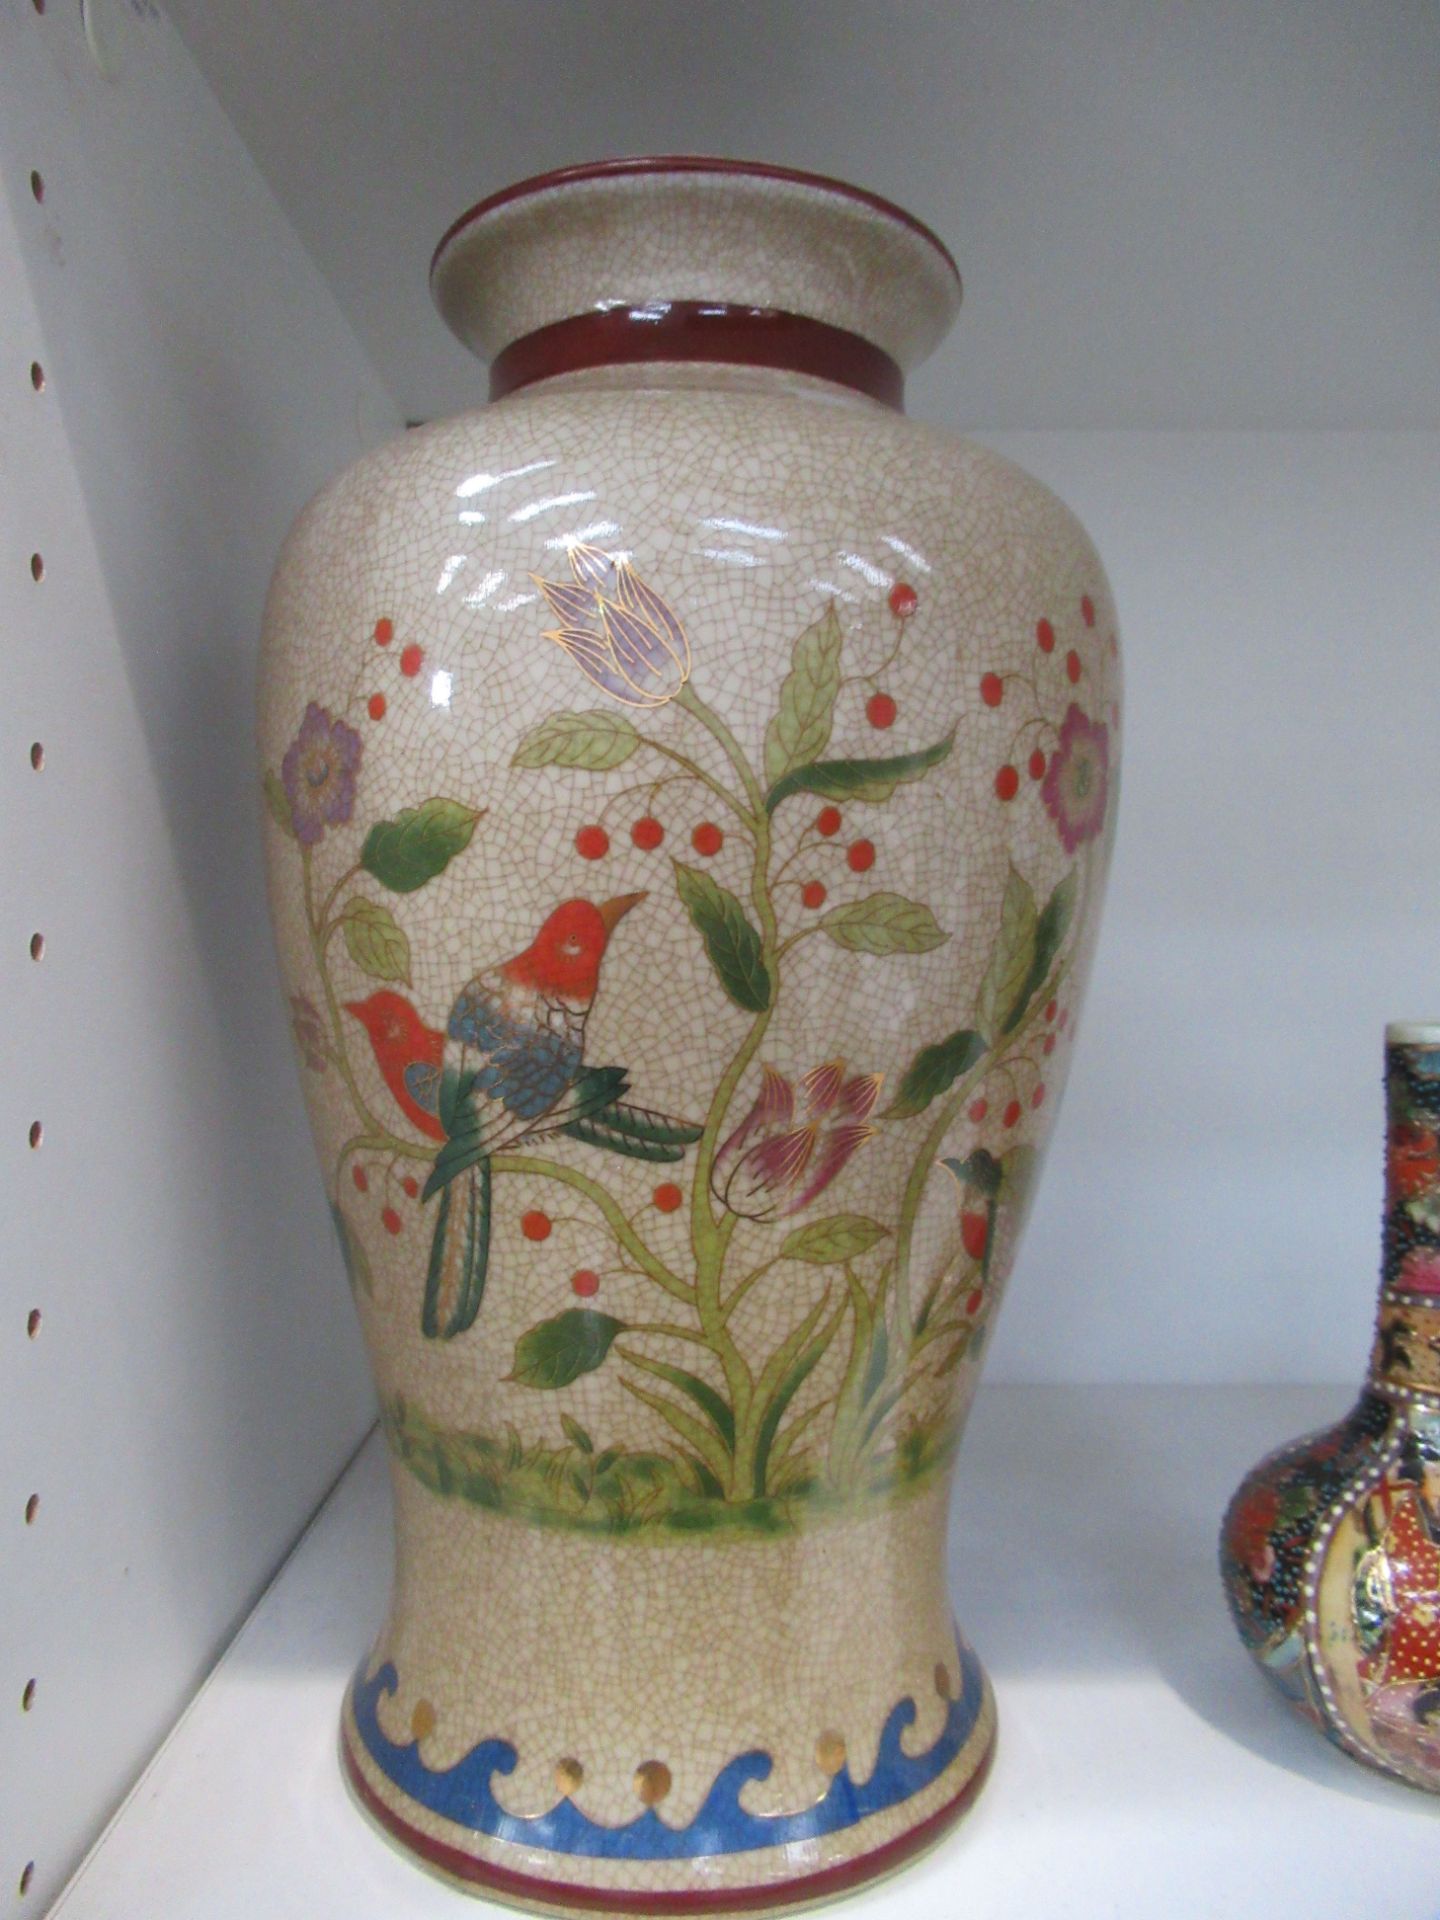 Shelf of Various Porcelain Items including a Vase with painted birds. - Image 9 of 9